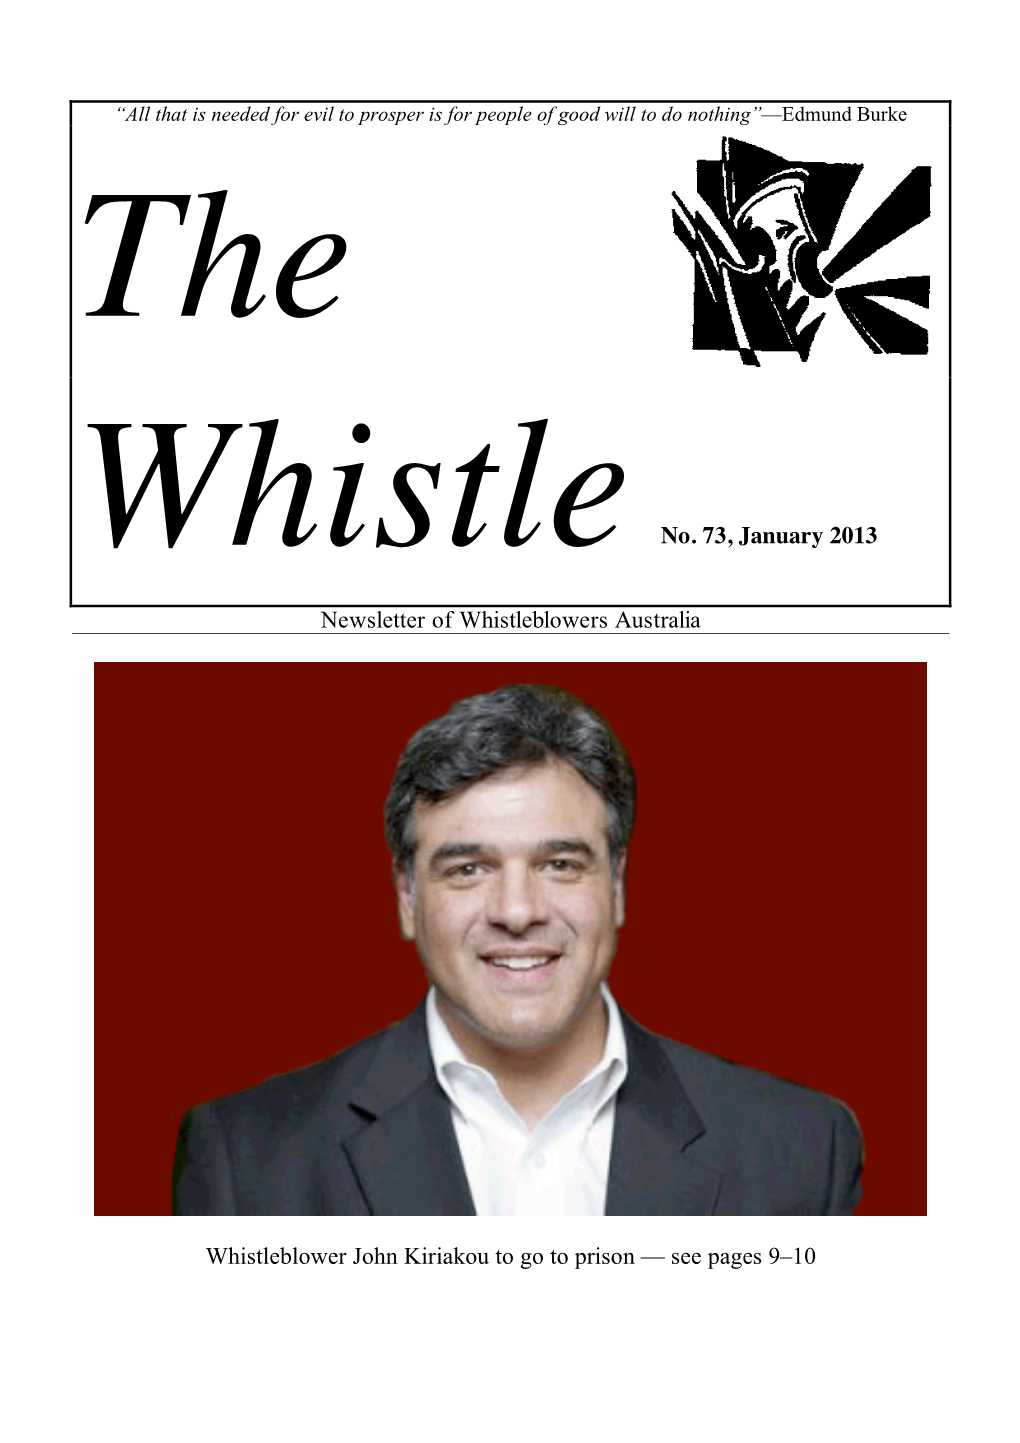 The Whistle, January 2013